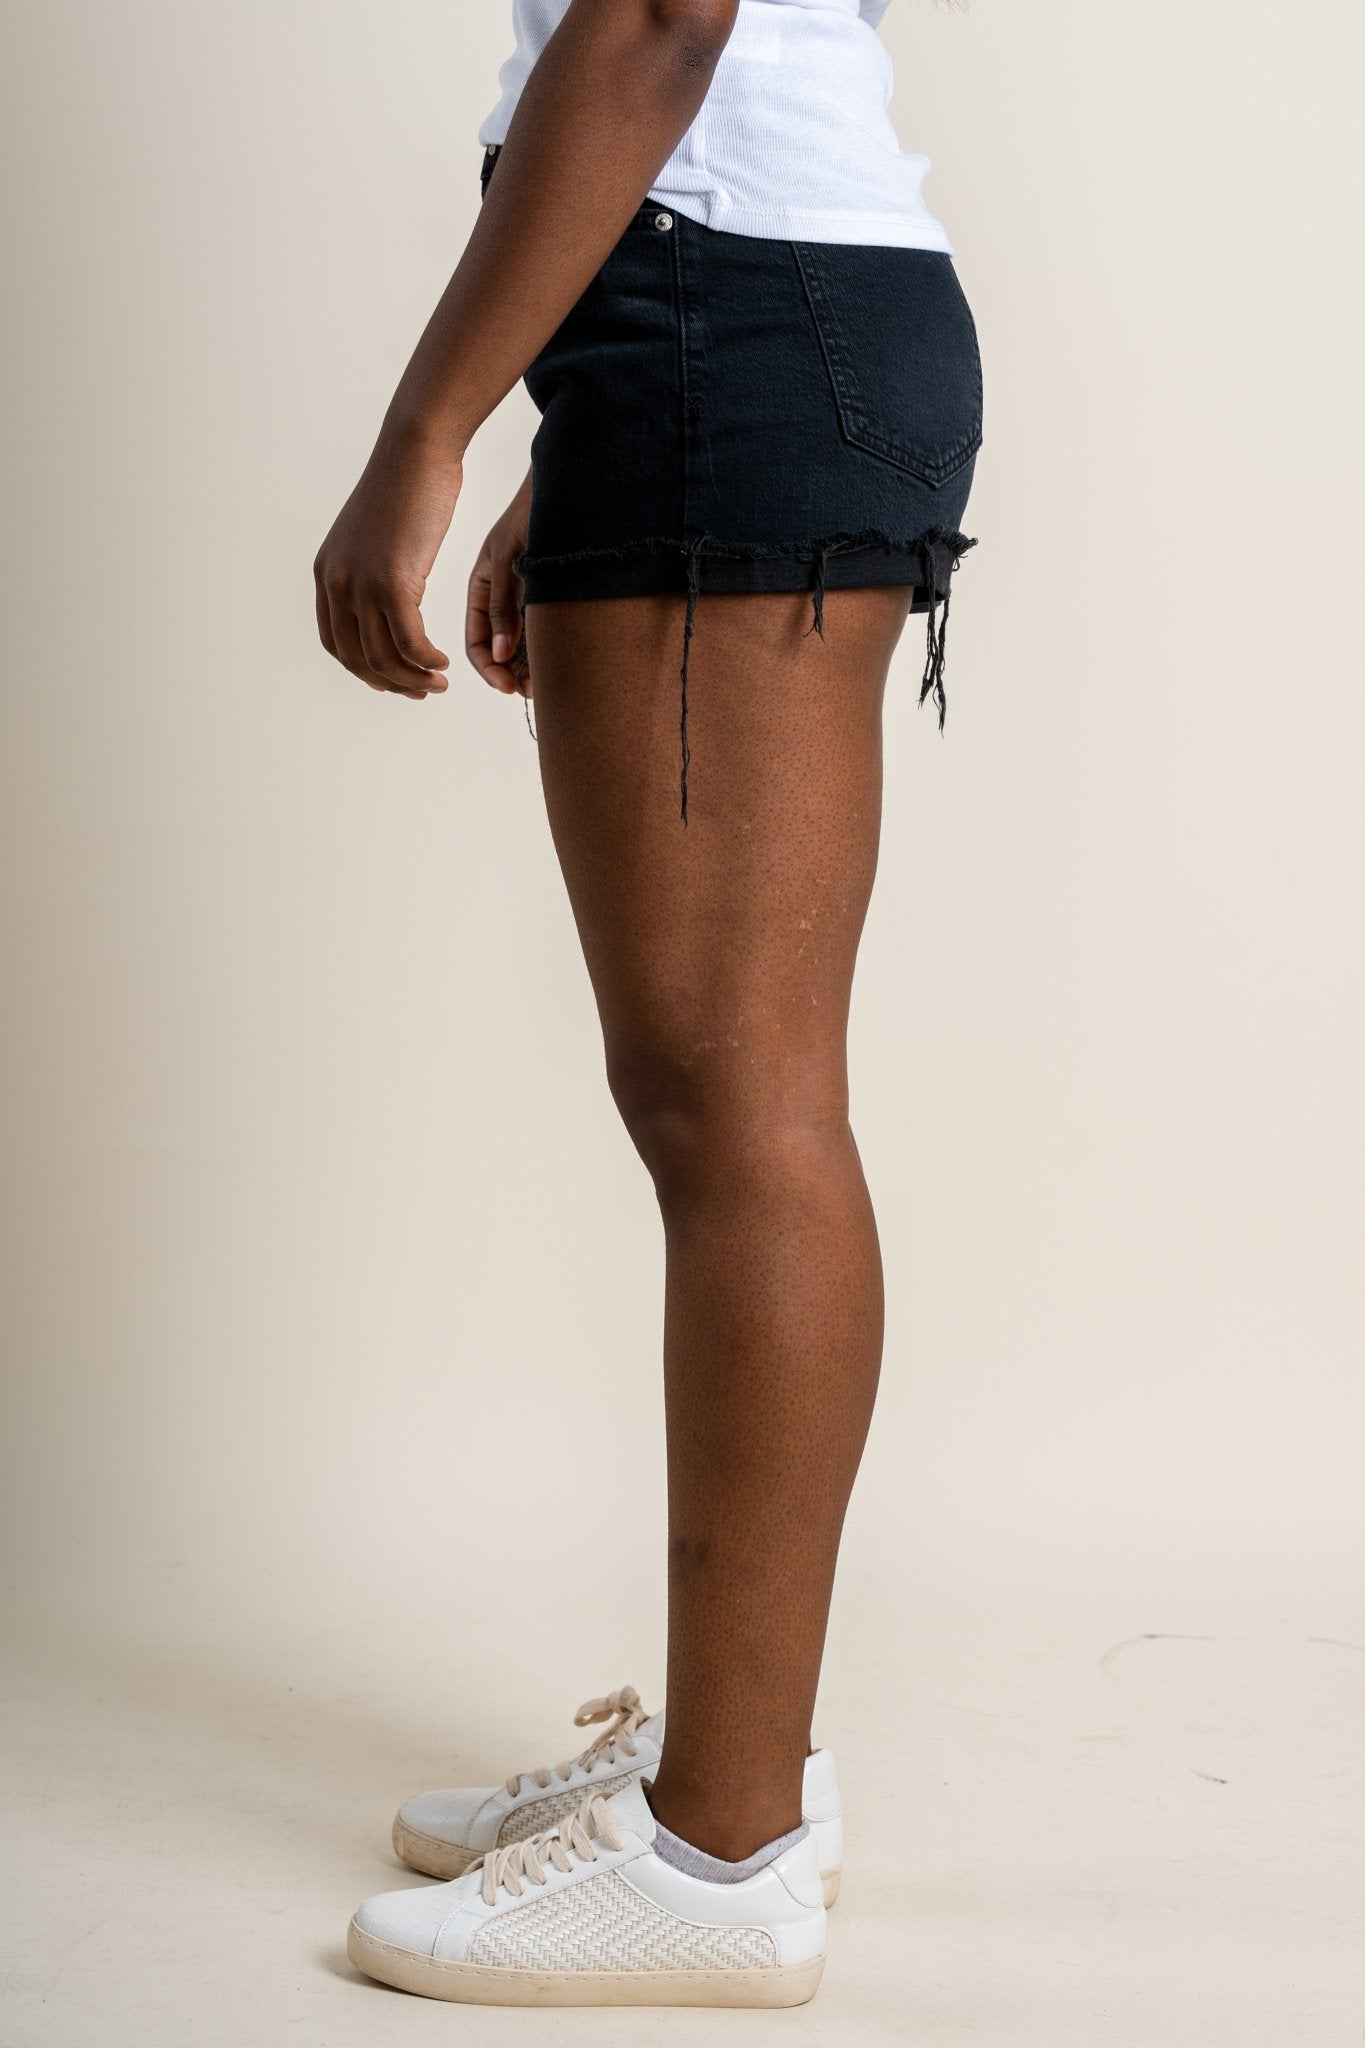 Daze troublemaker high rise shorts backseat - Fun Shorts - Unique Getaway Gear at Lush Fashion Lounge Boutique in Oklahoma